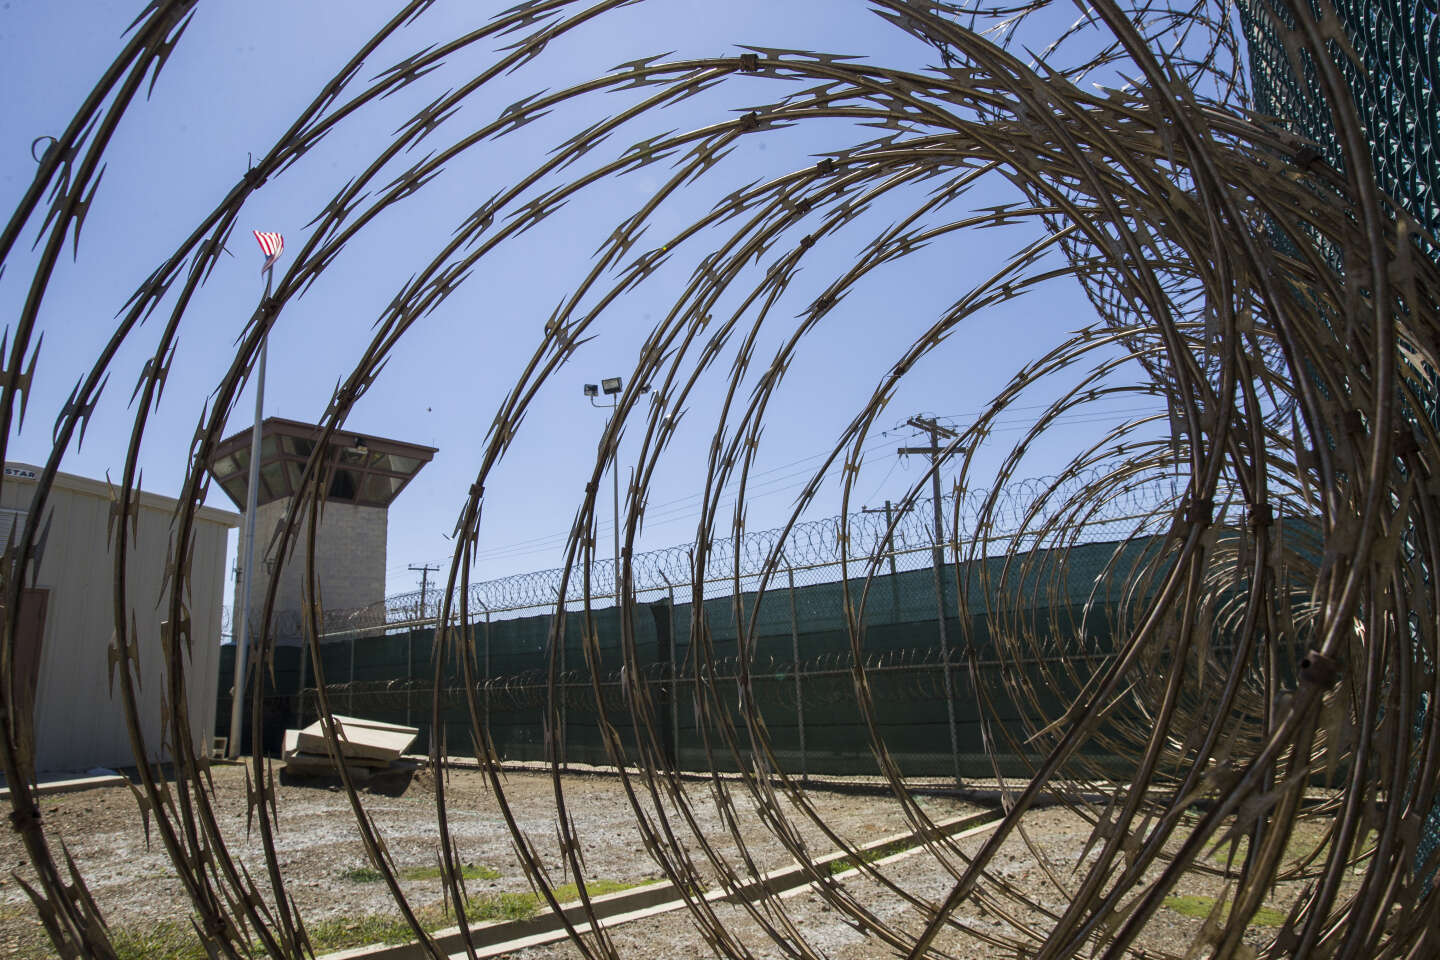 A detainee is released from Guantanamo and returned to Saudi Arabia